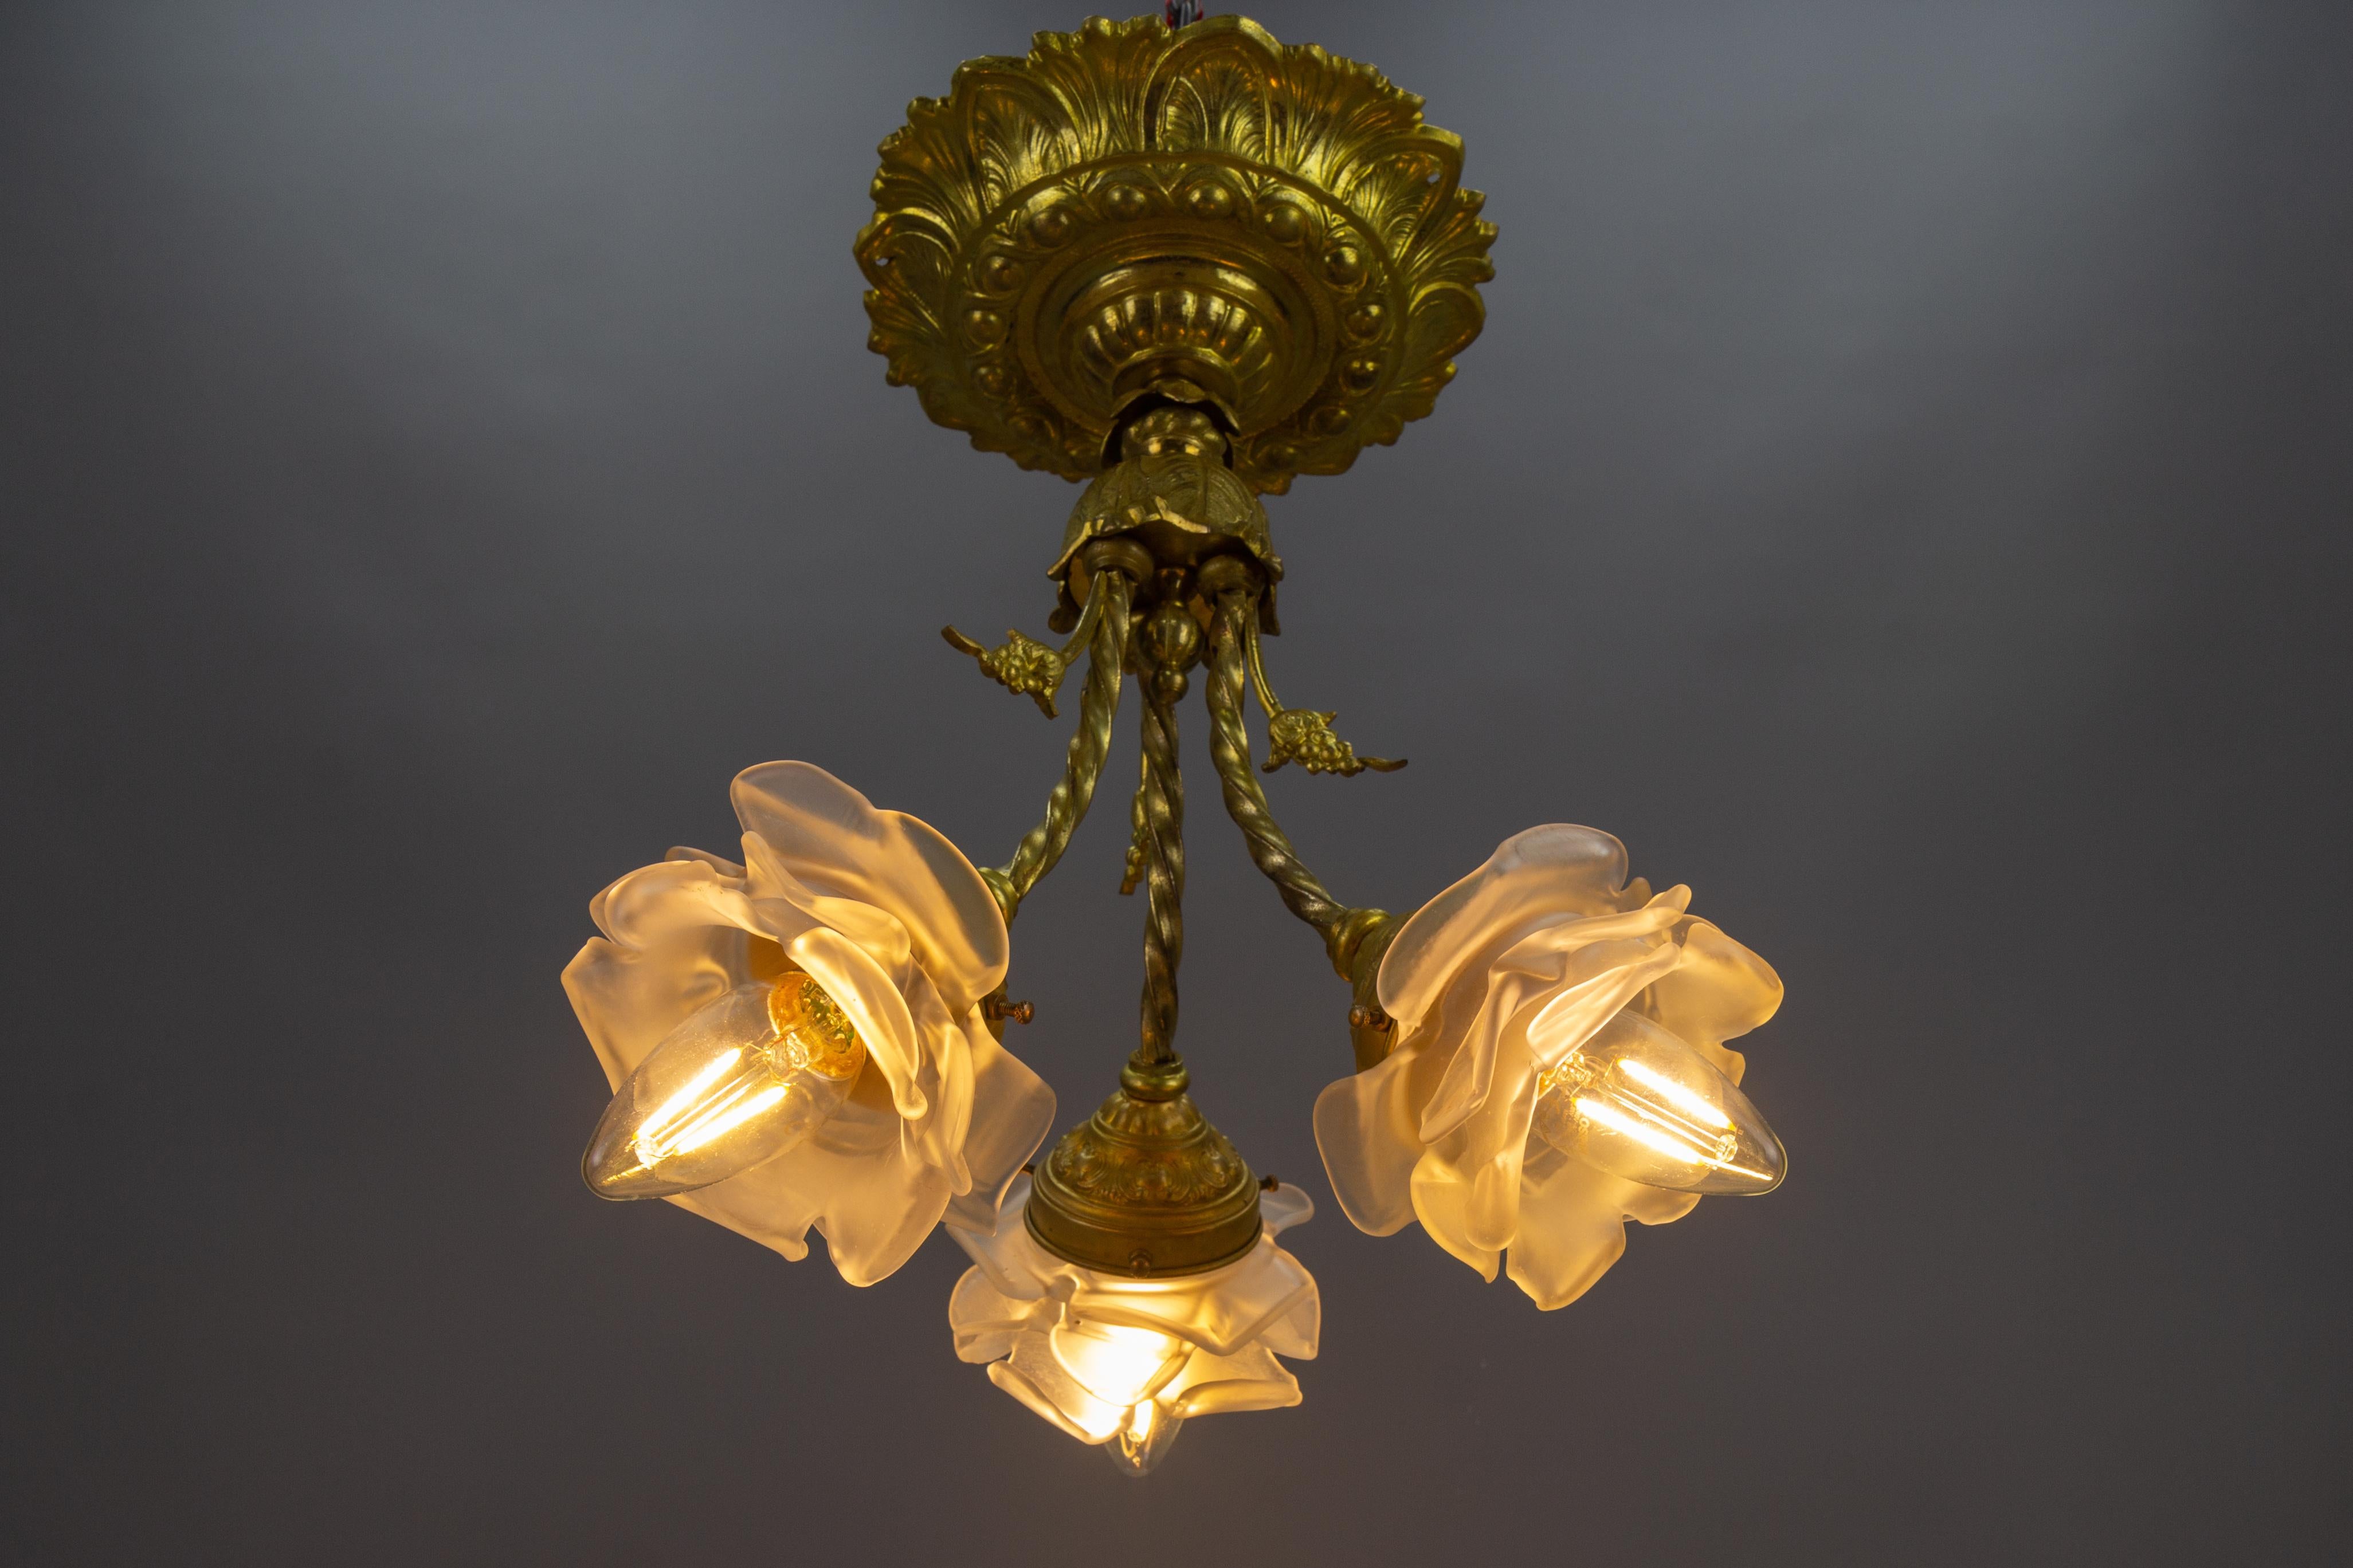 French Neoclassical style bronze, brass, and glass ceiling light fixture, from circa the 1920s.
This adorable Neoclassical style three-light ceiling lamp features an impressive and ornate ceiling canopy, three arms each with a flower-shaped glass